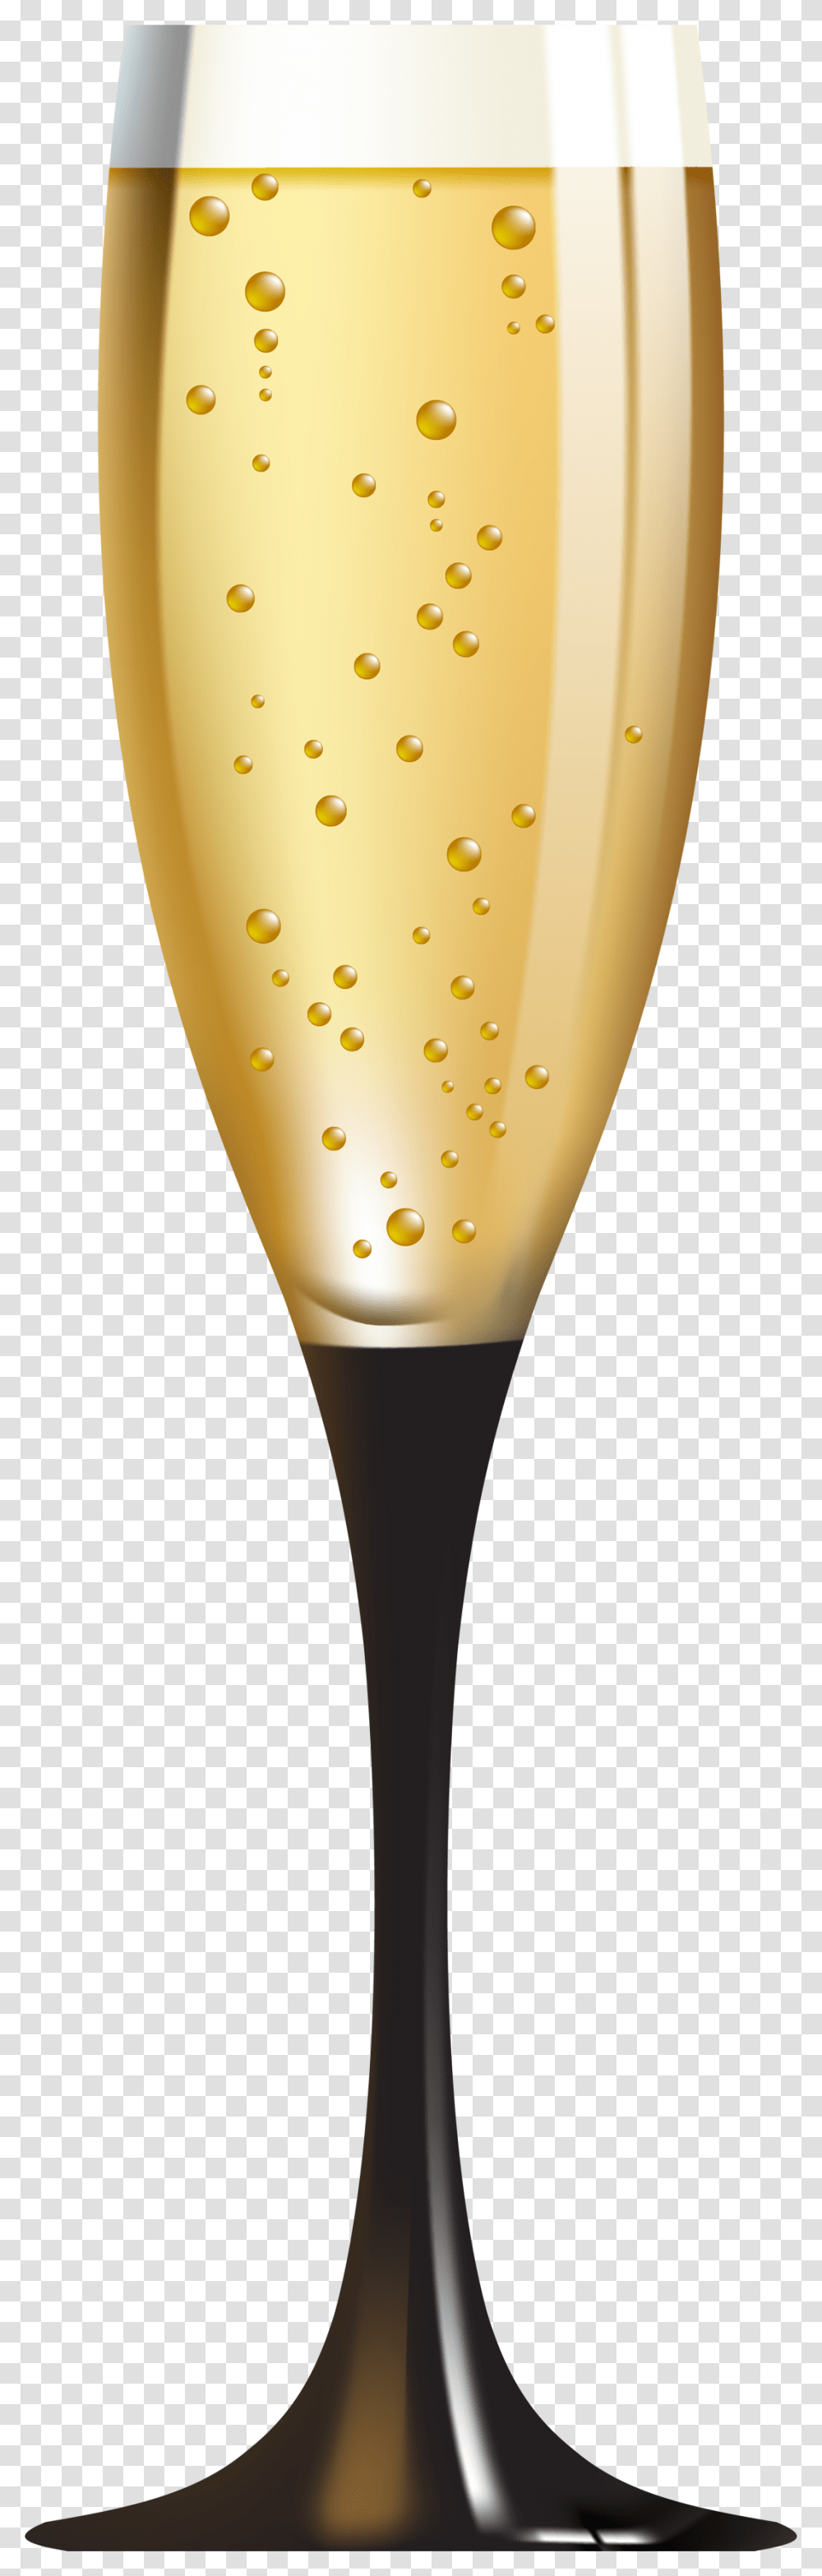 Champagne, Drink, Glass, Beer, Alcohol Transparent Png